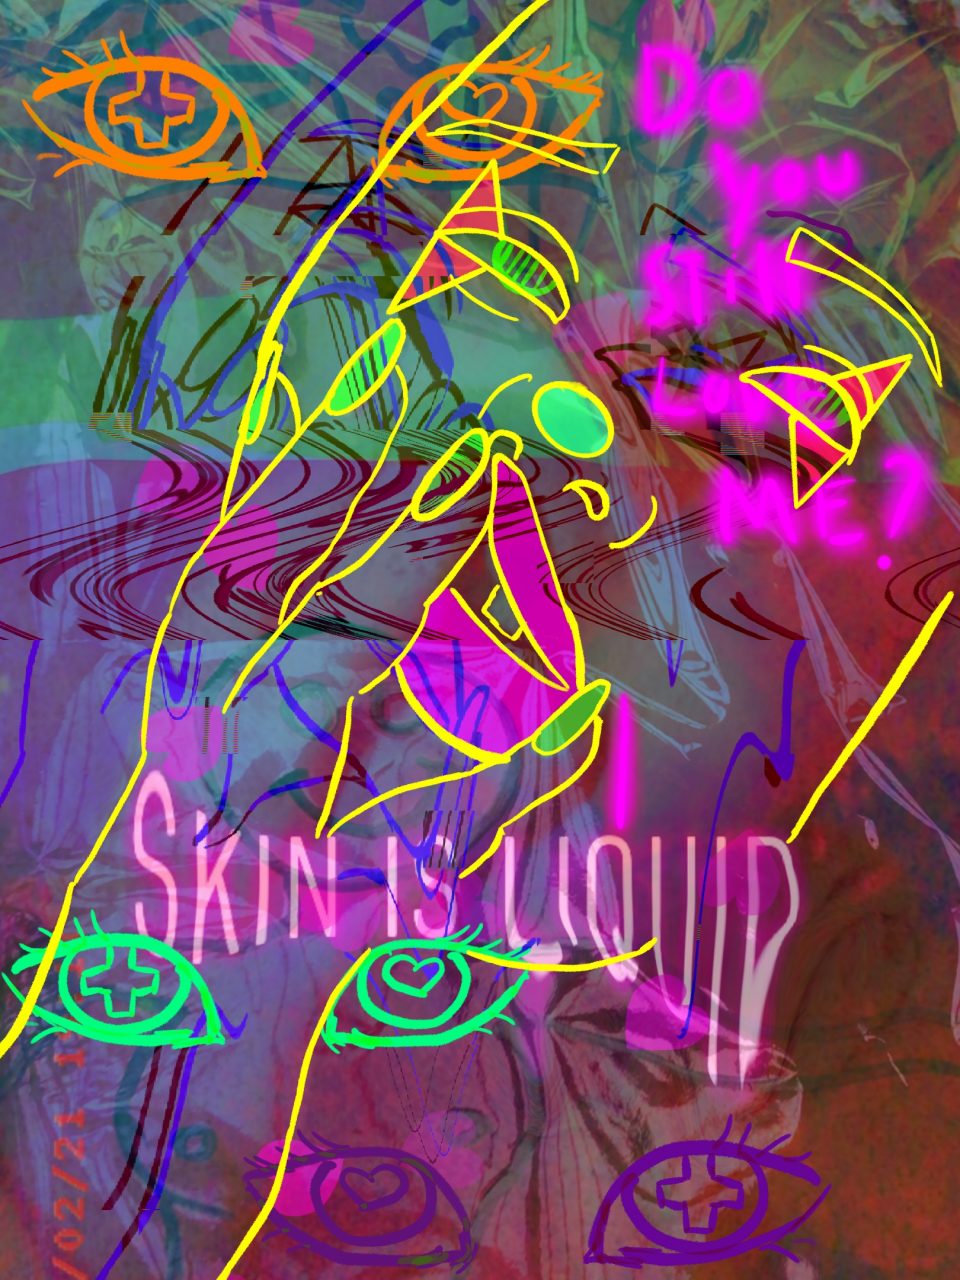 Do you love me in this skin, image detail